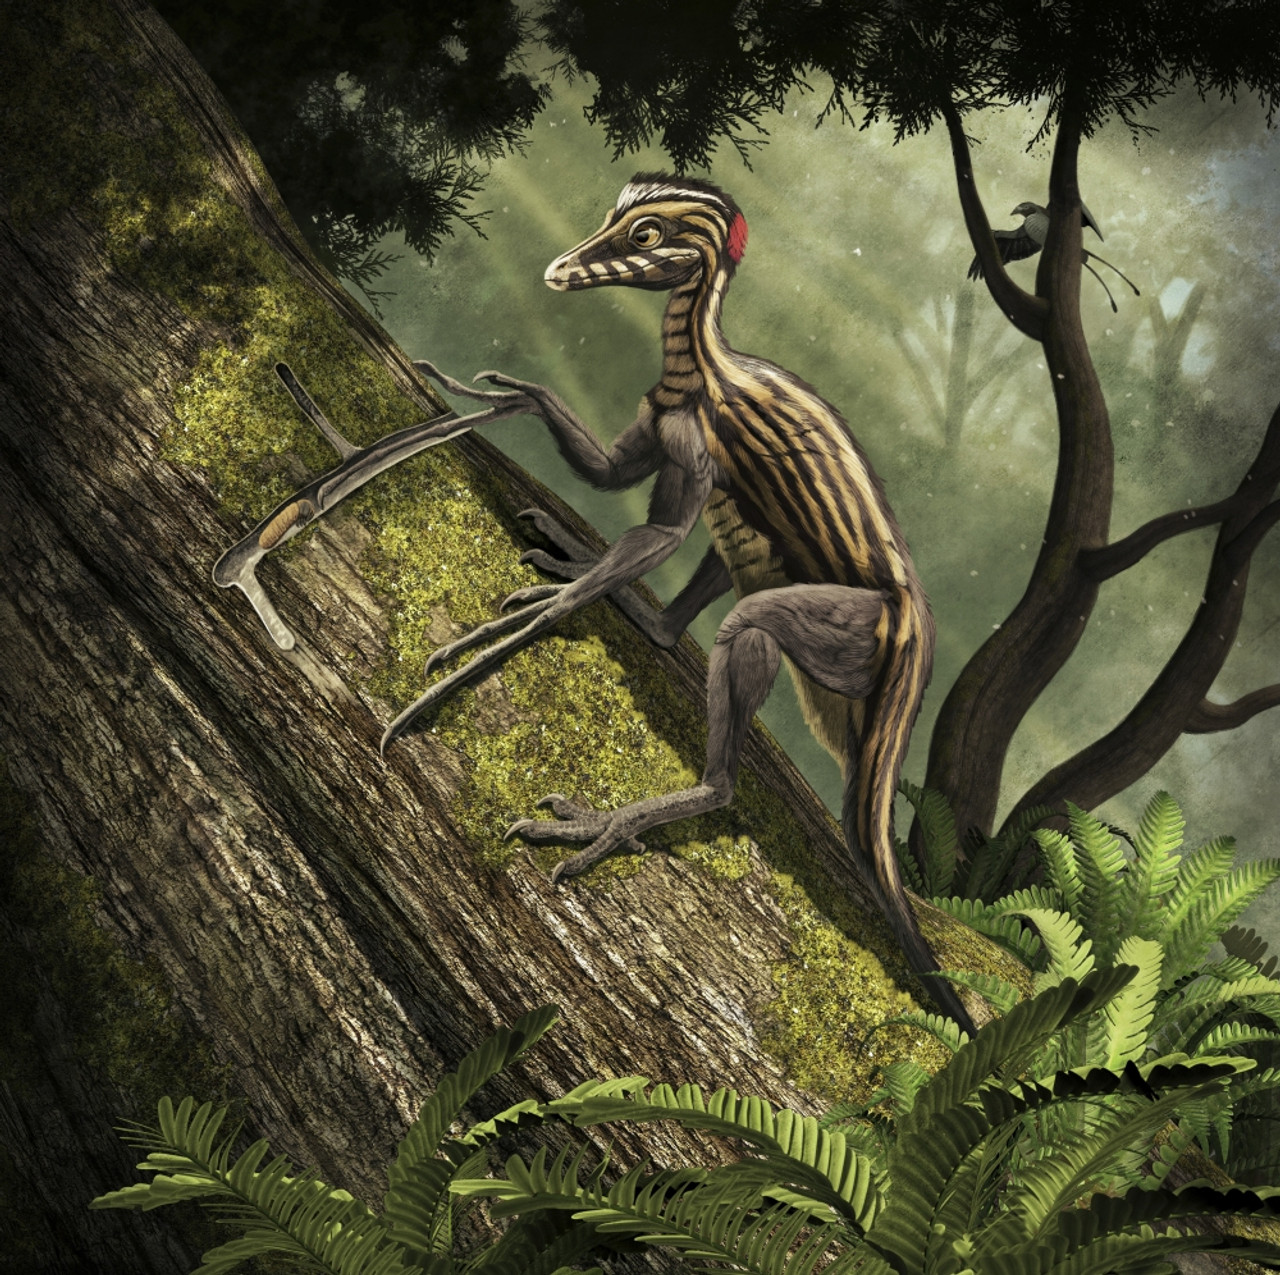 Epidendrosaurus Ninchengensis A Tree Dwelling Theropod Specializing In Capturing Wood Worms With Its Extremely Elongated Finger Late Jurassic Of China Poster Print Item Varpstrgmp Posterazzi